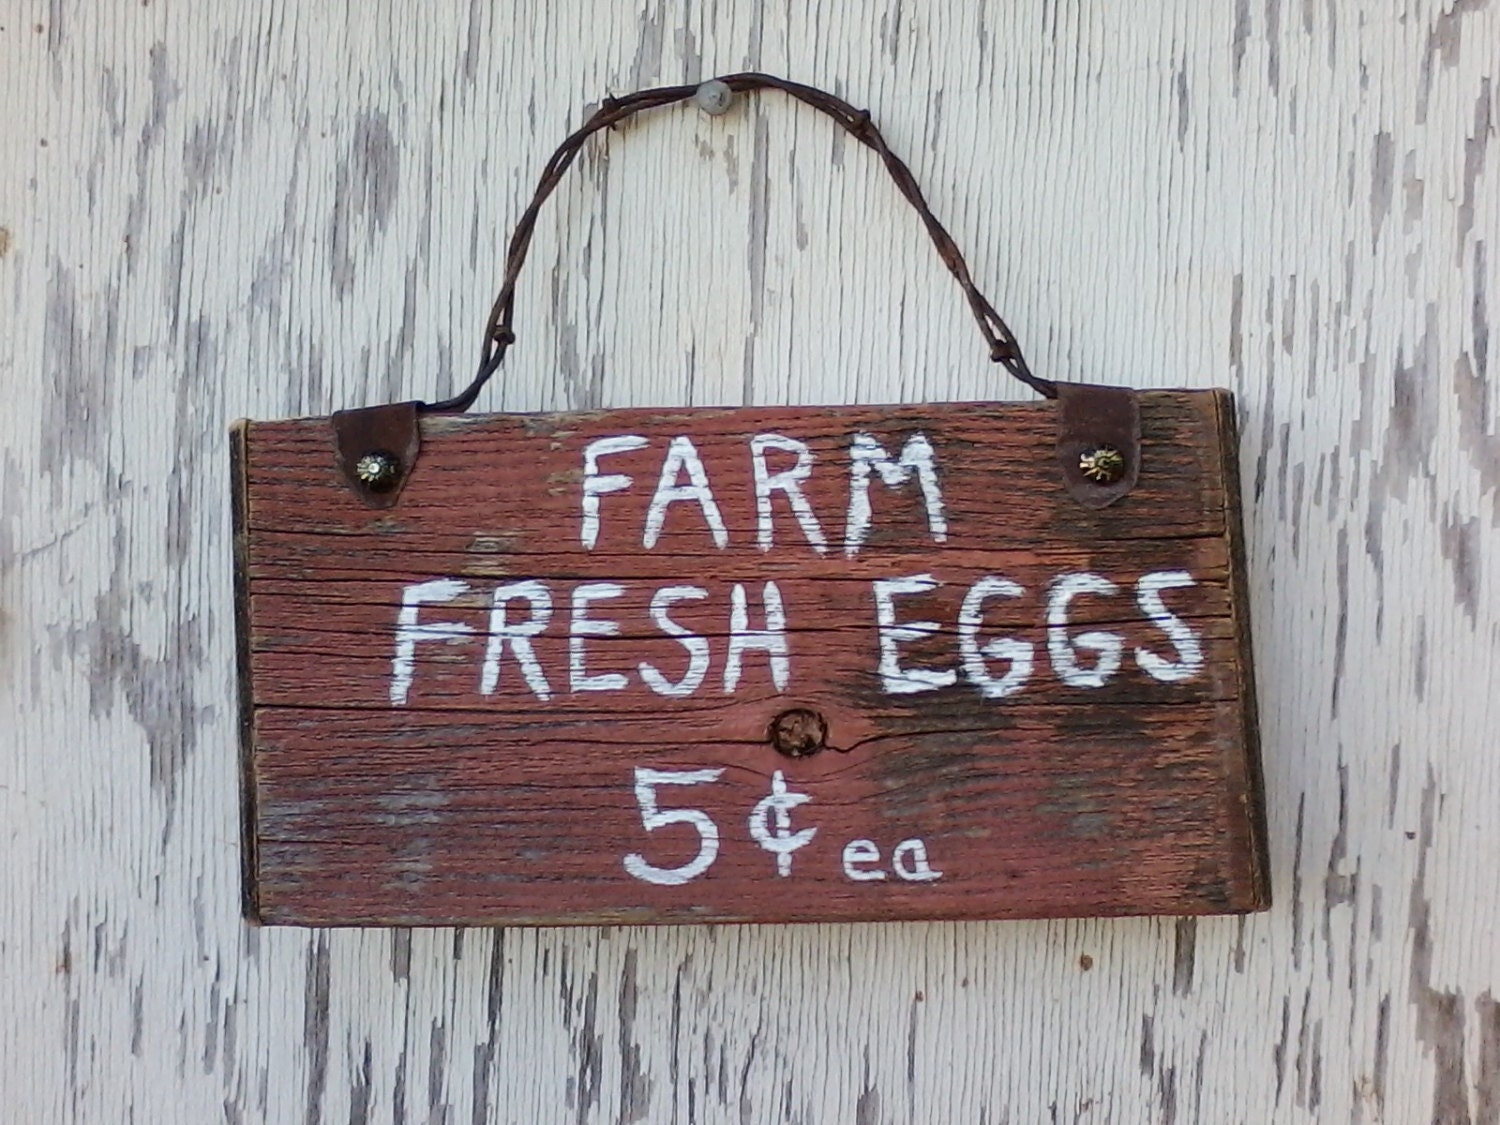 Rustic Reclaimed Wood Farm Fresh Eggs Sign. by BitsoftheWest